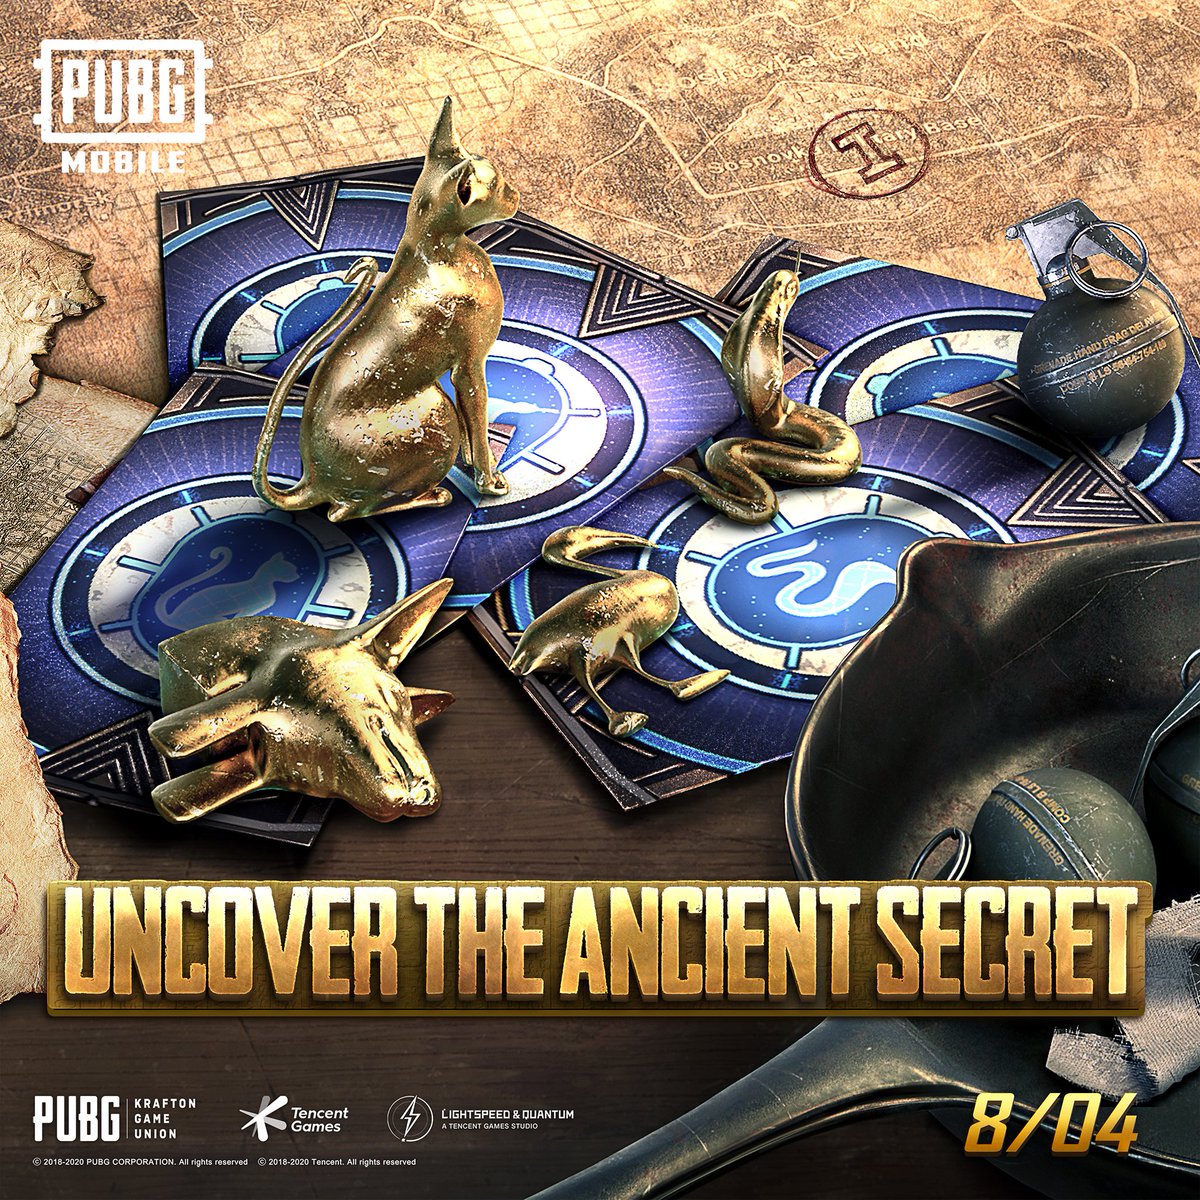 PUBG MOBILE on Twitter: "Ancient secrets - what could they mean?! 🔎  Uncover the secrets starting on August 4th! 👉 https://t.co/hZqnJobtQz  https://t.co/VJAthGRhld" / Twitter